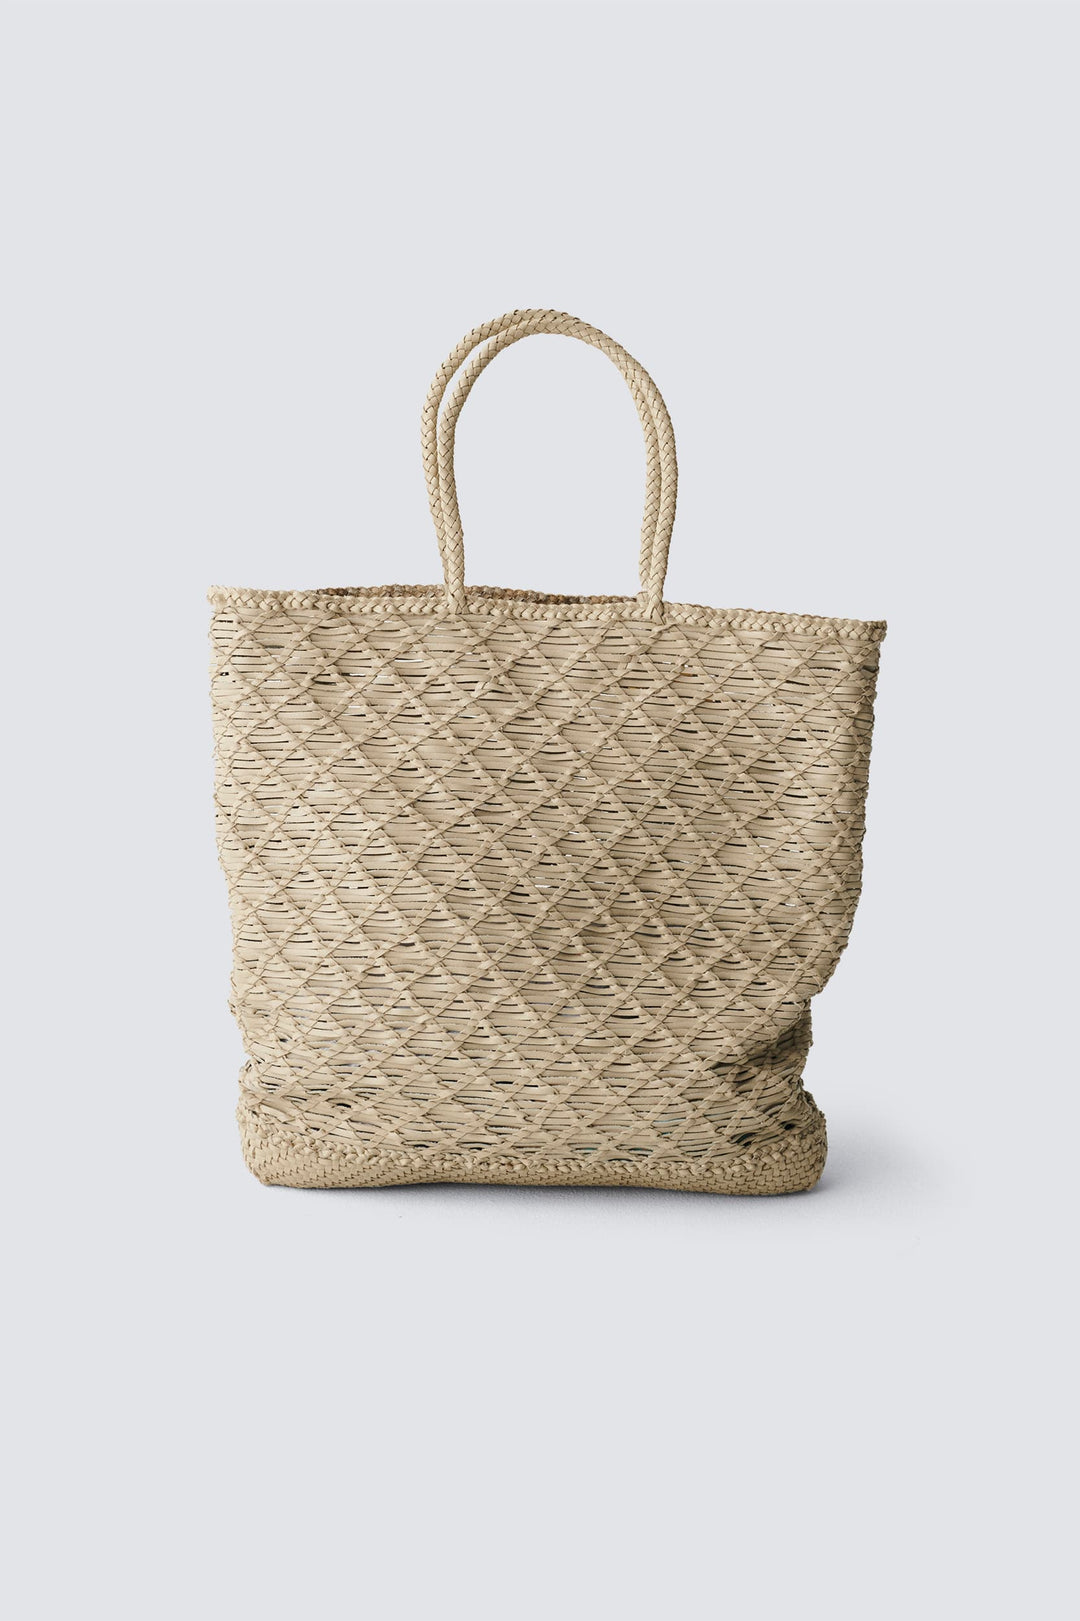 Dragon Diffusion Genuine Leather French Woven Bag Vegetable 